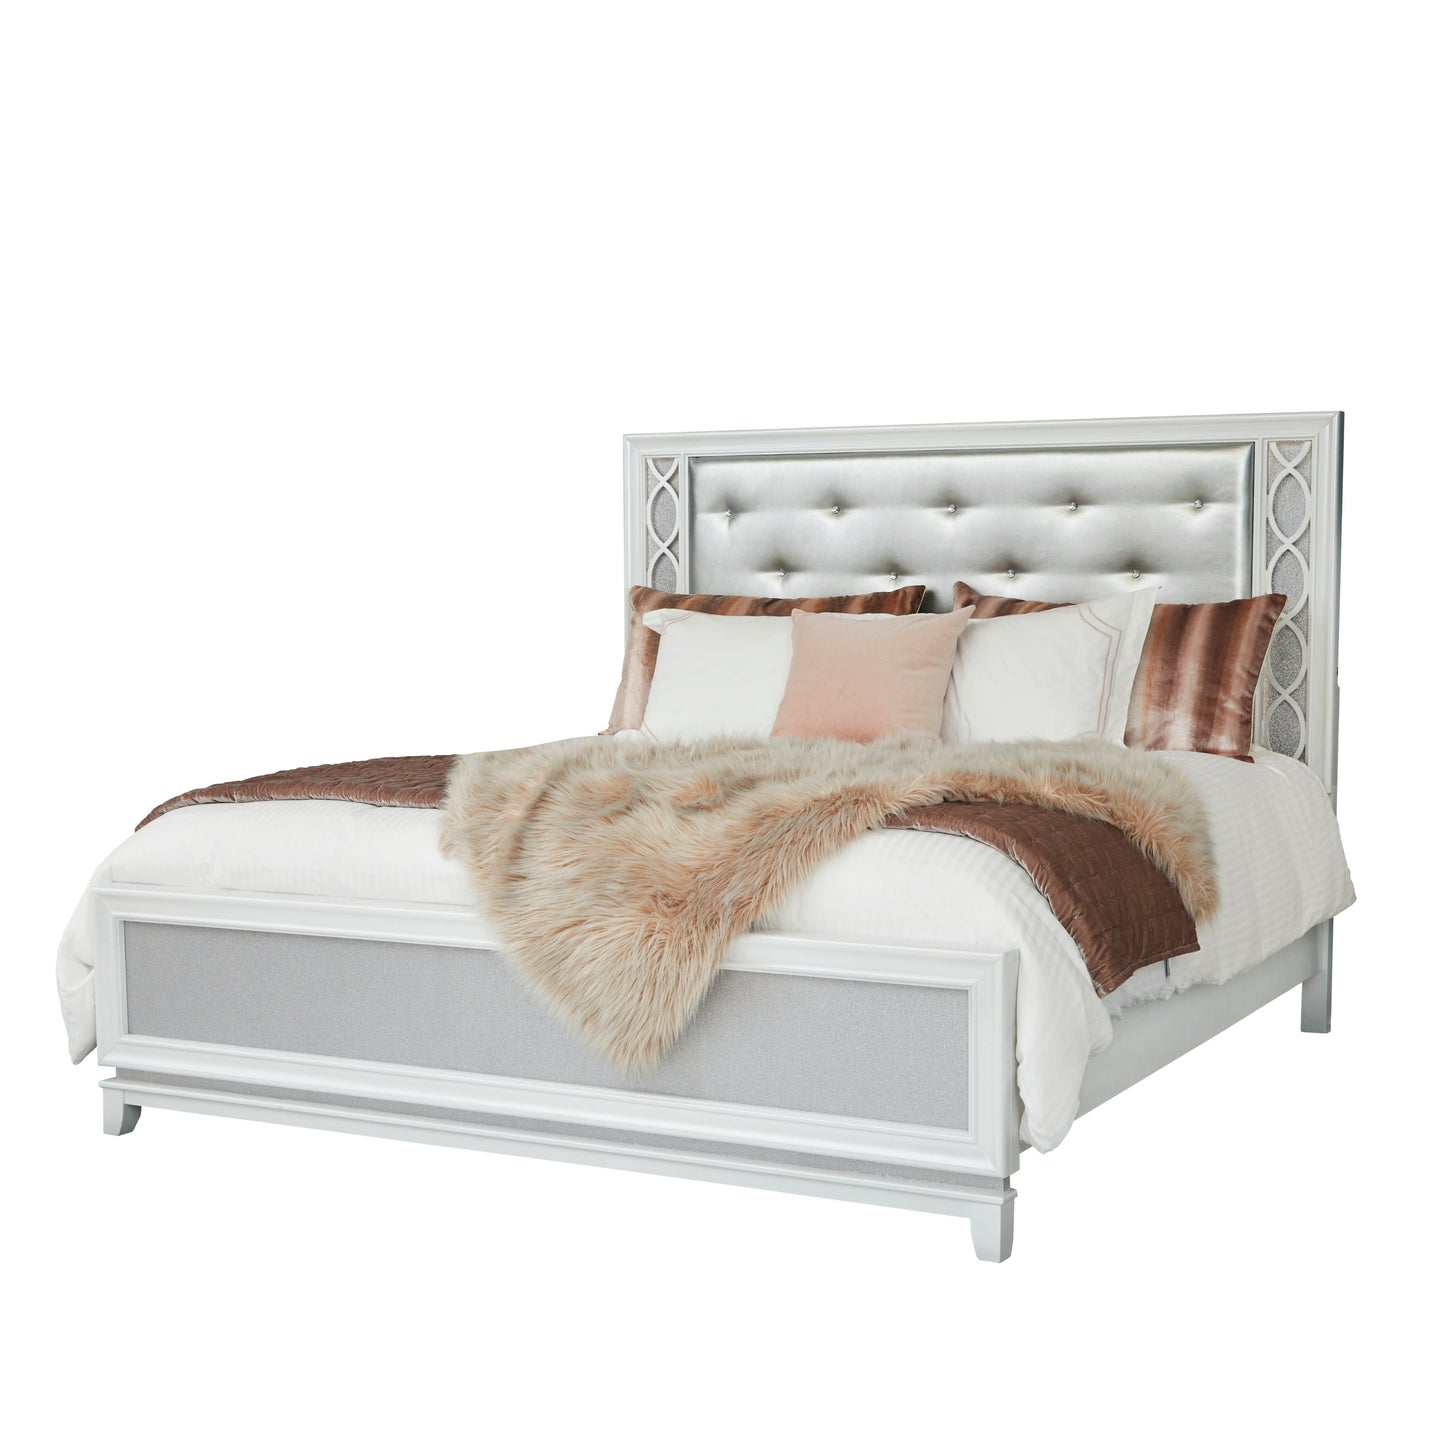 Roundhill Furniture Galaxy Bedroom Collection with LED Lights, Pearlized White